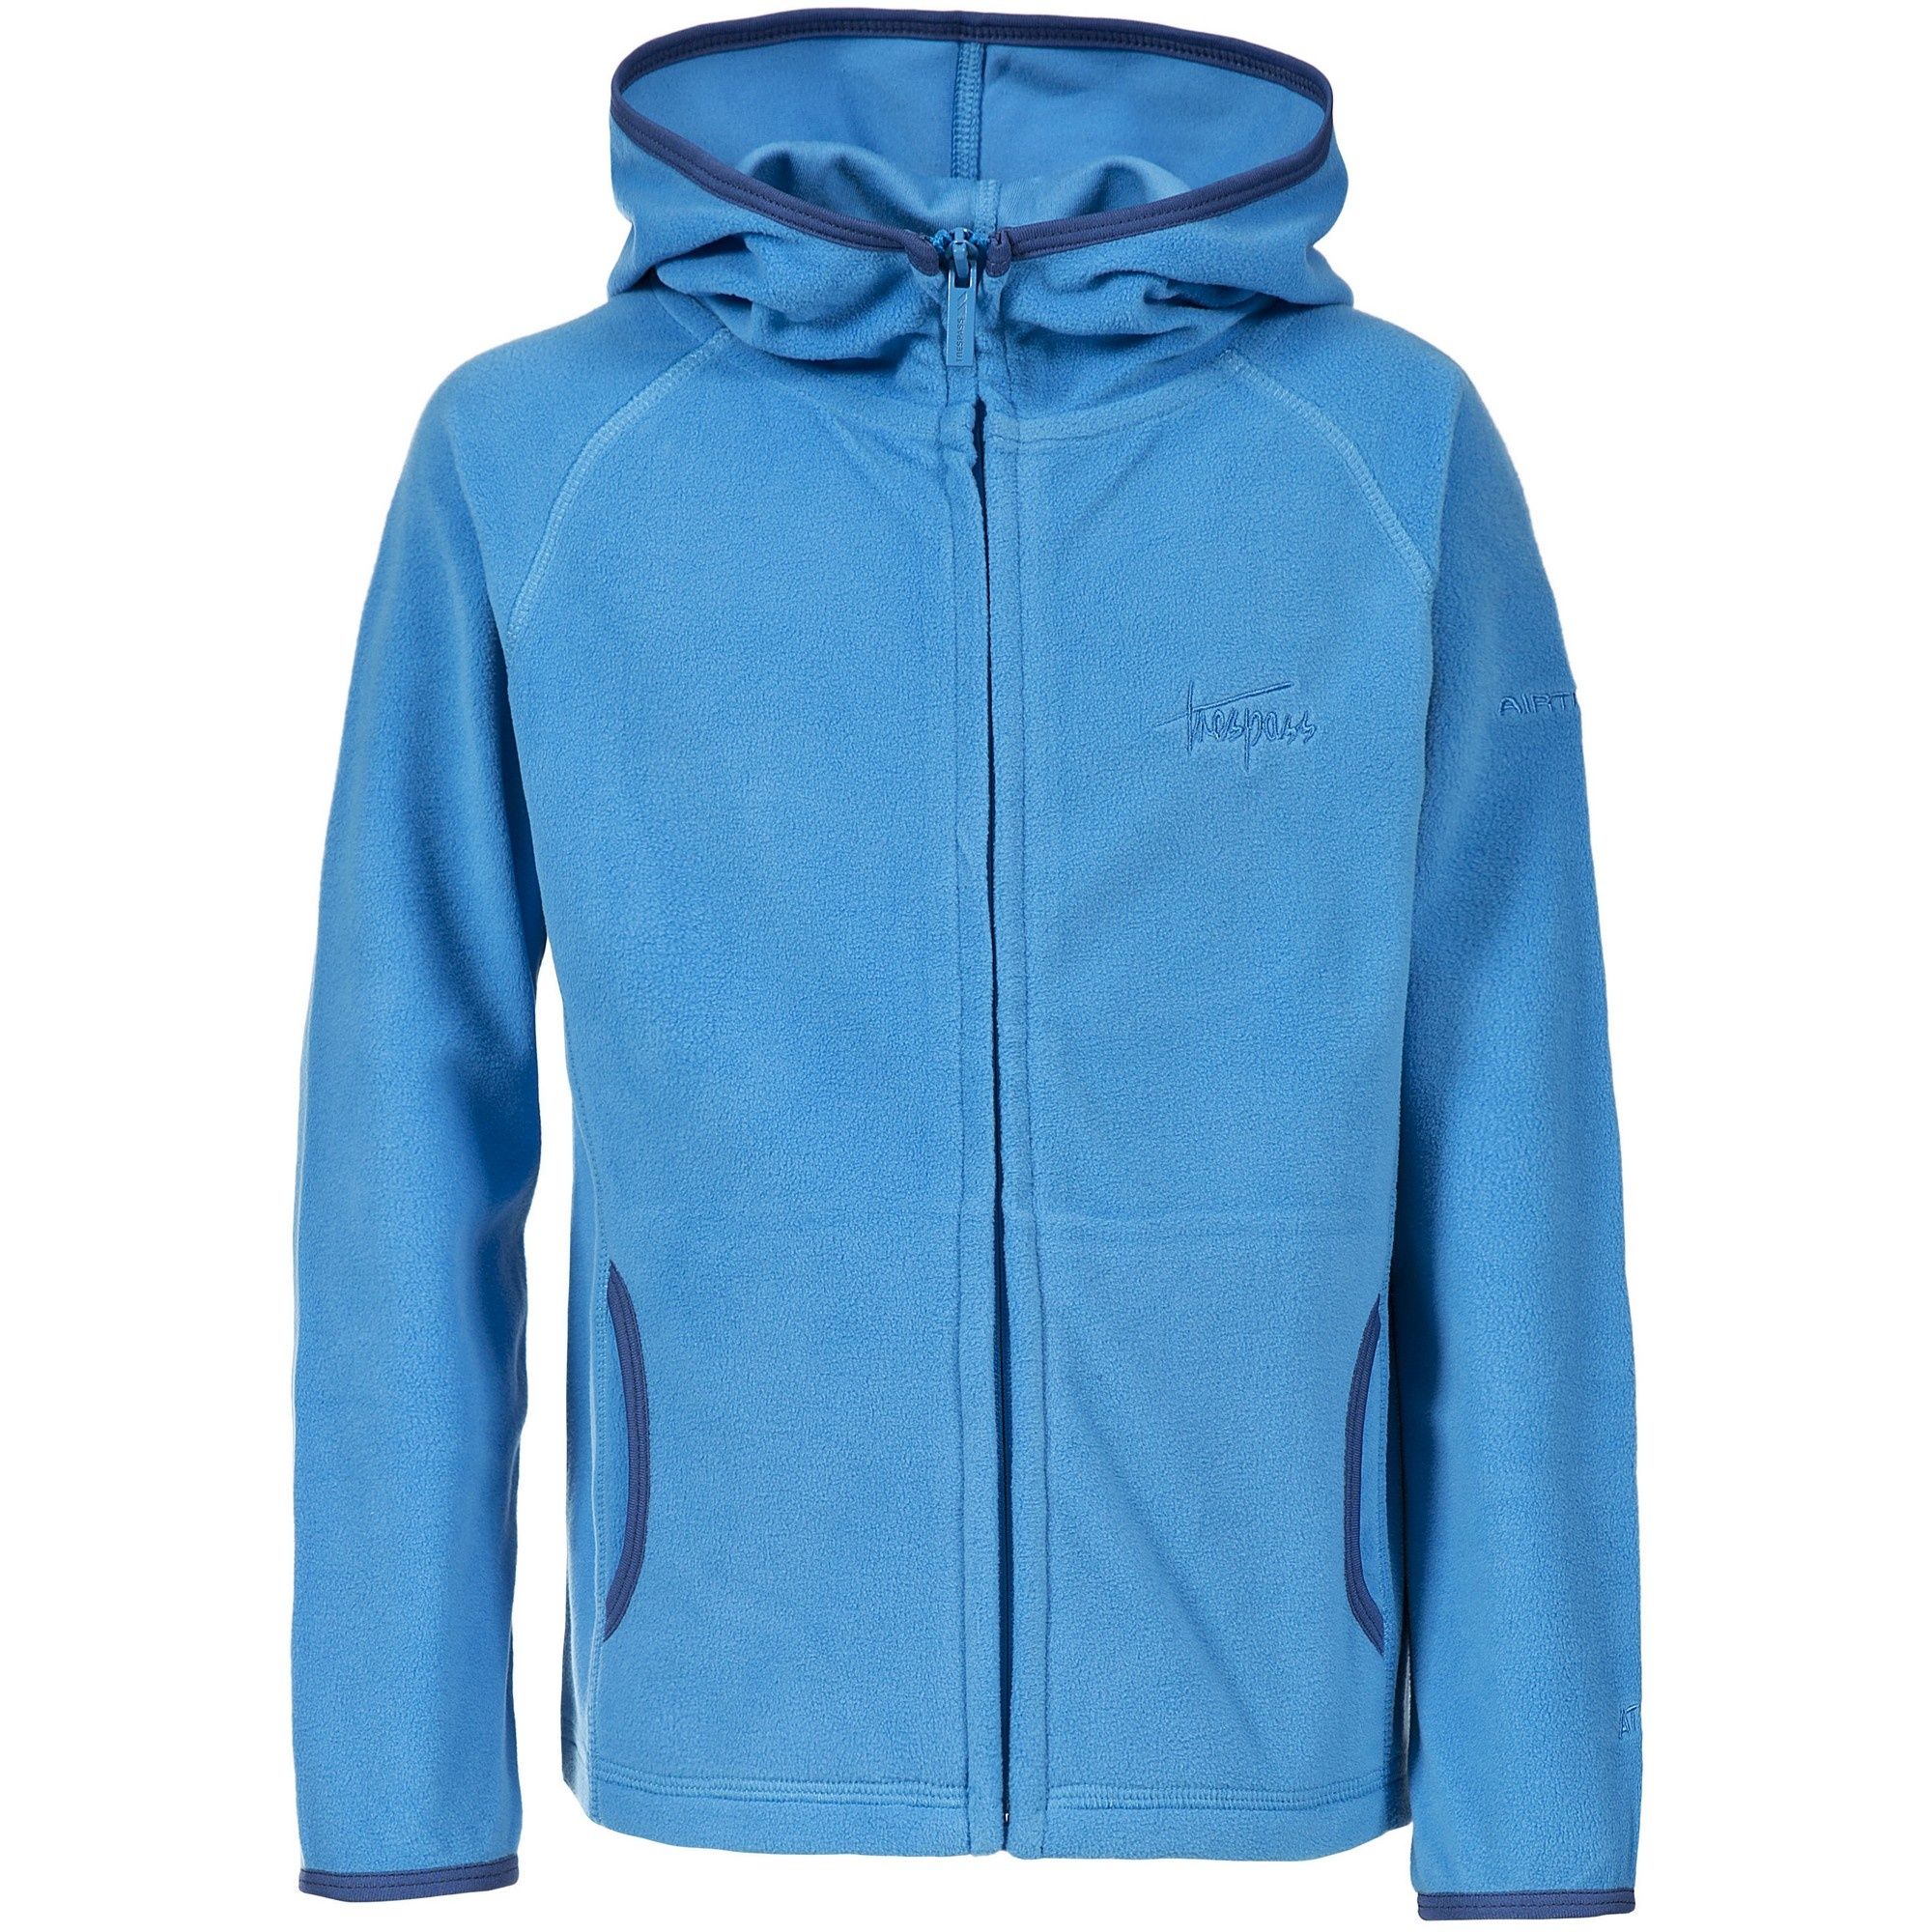 Grown on hood with contrast binding. Full front zip. Lower pockets with contrast binding. Contrast binding at cuffs. 100% Polyester Microfleece. Trespass Childrens Chest Sizing (approx): 2/3 Years - 21in/53cm, 3/4 Years - 22in/56cm, 5/6 Years - 24in/61cm, 7/8 Years - 26in/66cm, 9/10 Years - 28in/71cm, 11/12 Years - 31in/79cm.